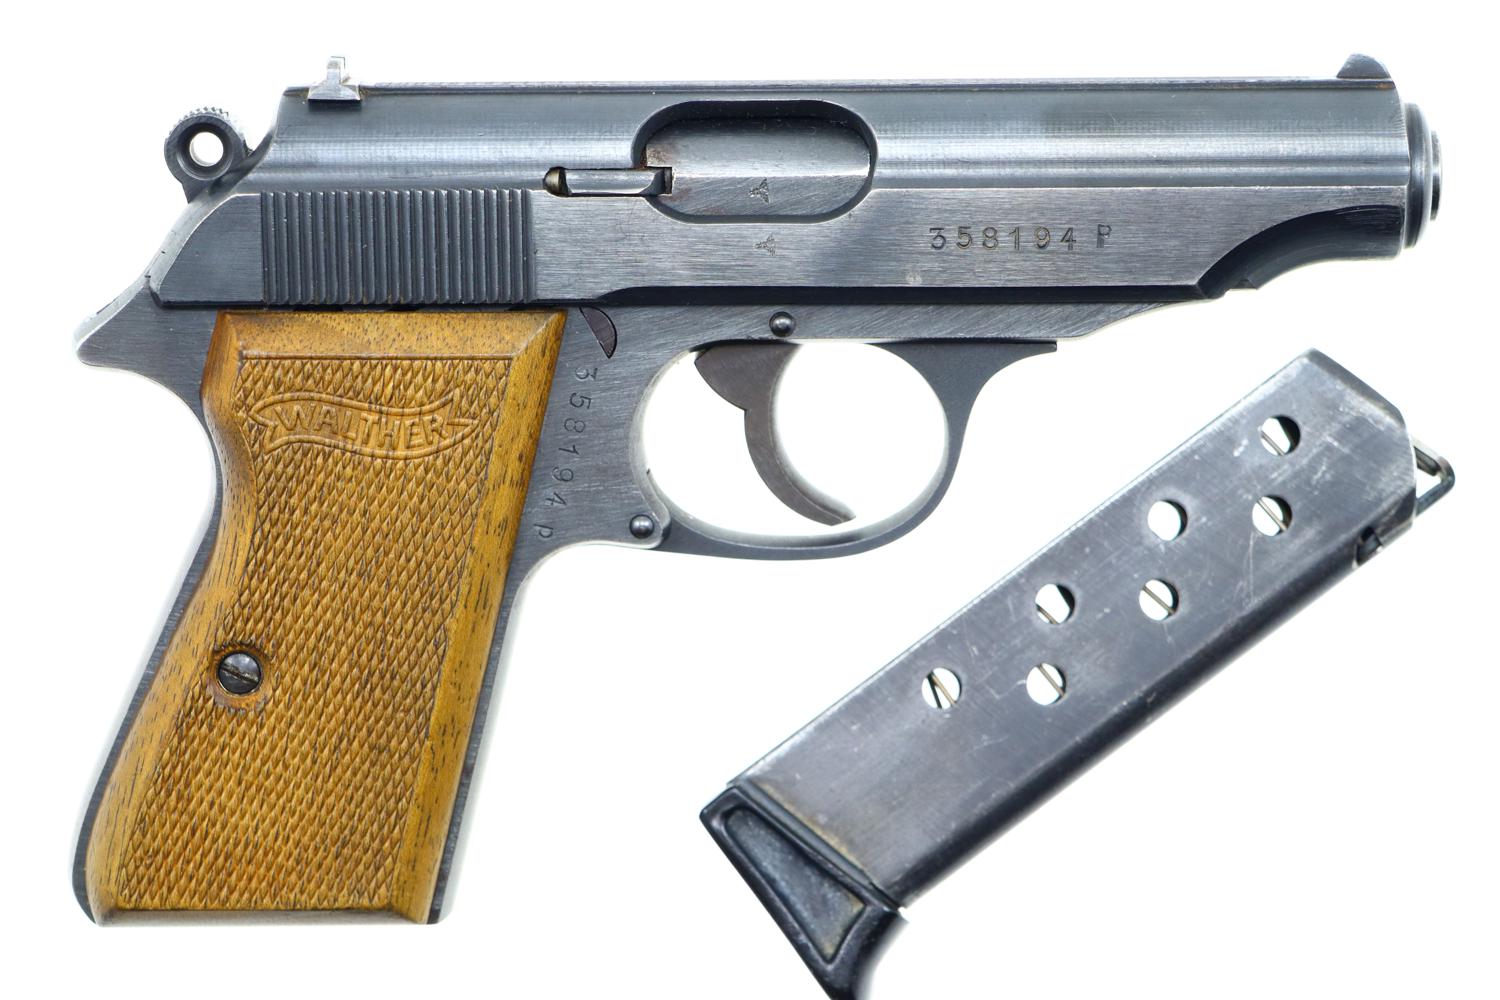 WWII German Walther PP, Police Eagle F, #358194 P,  A-1858-img-1